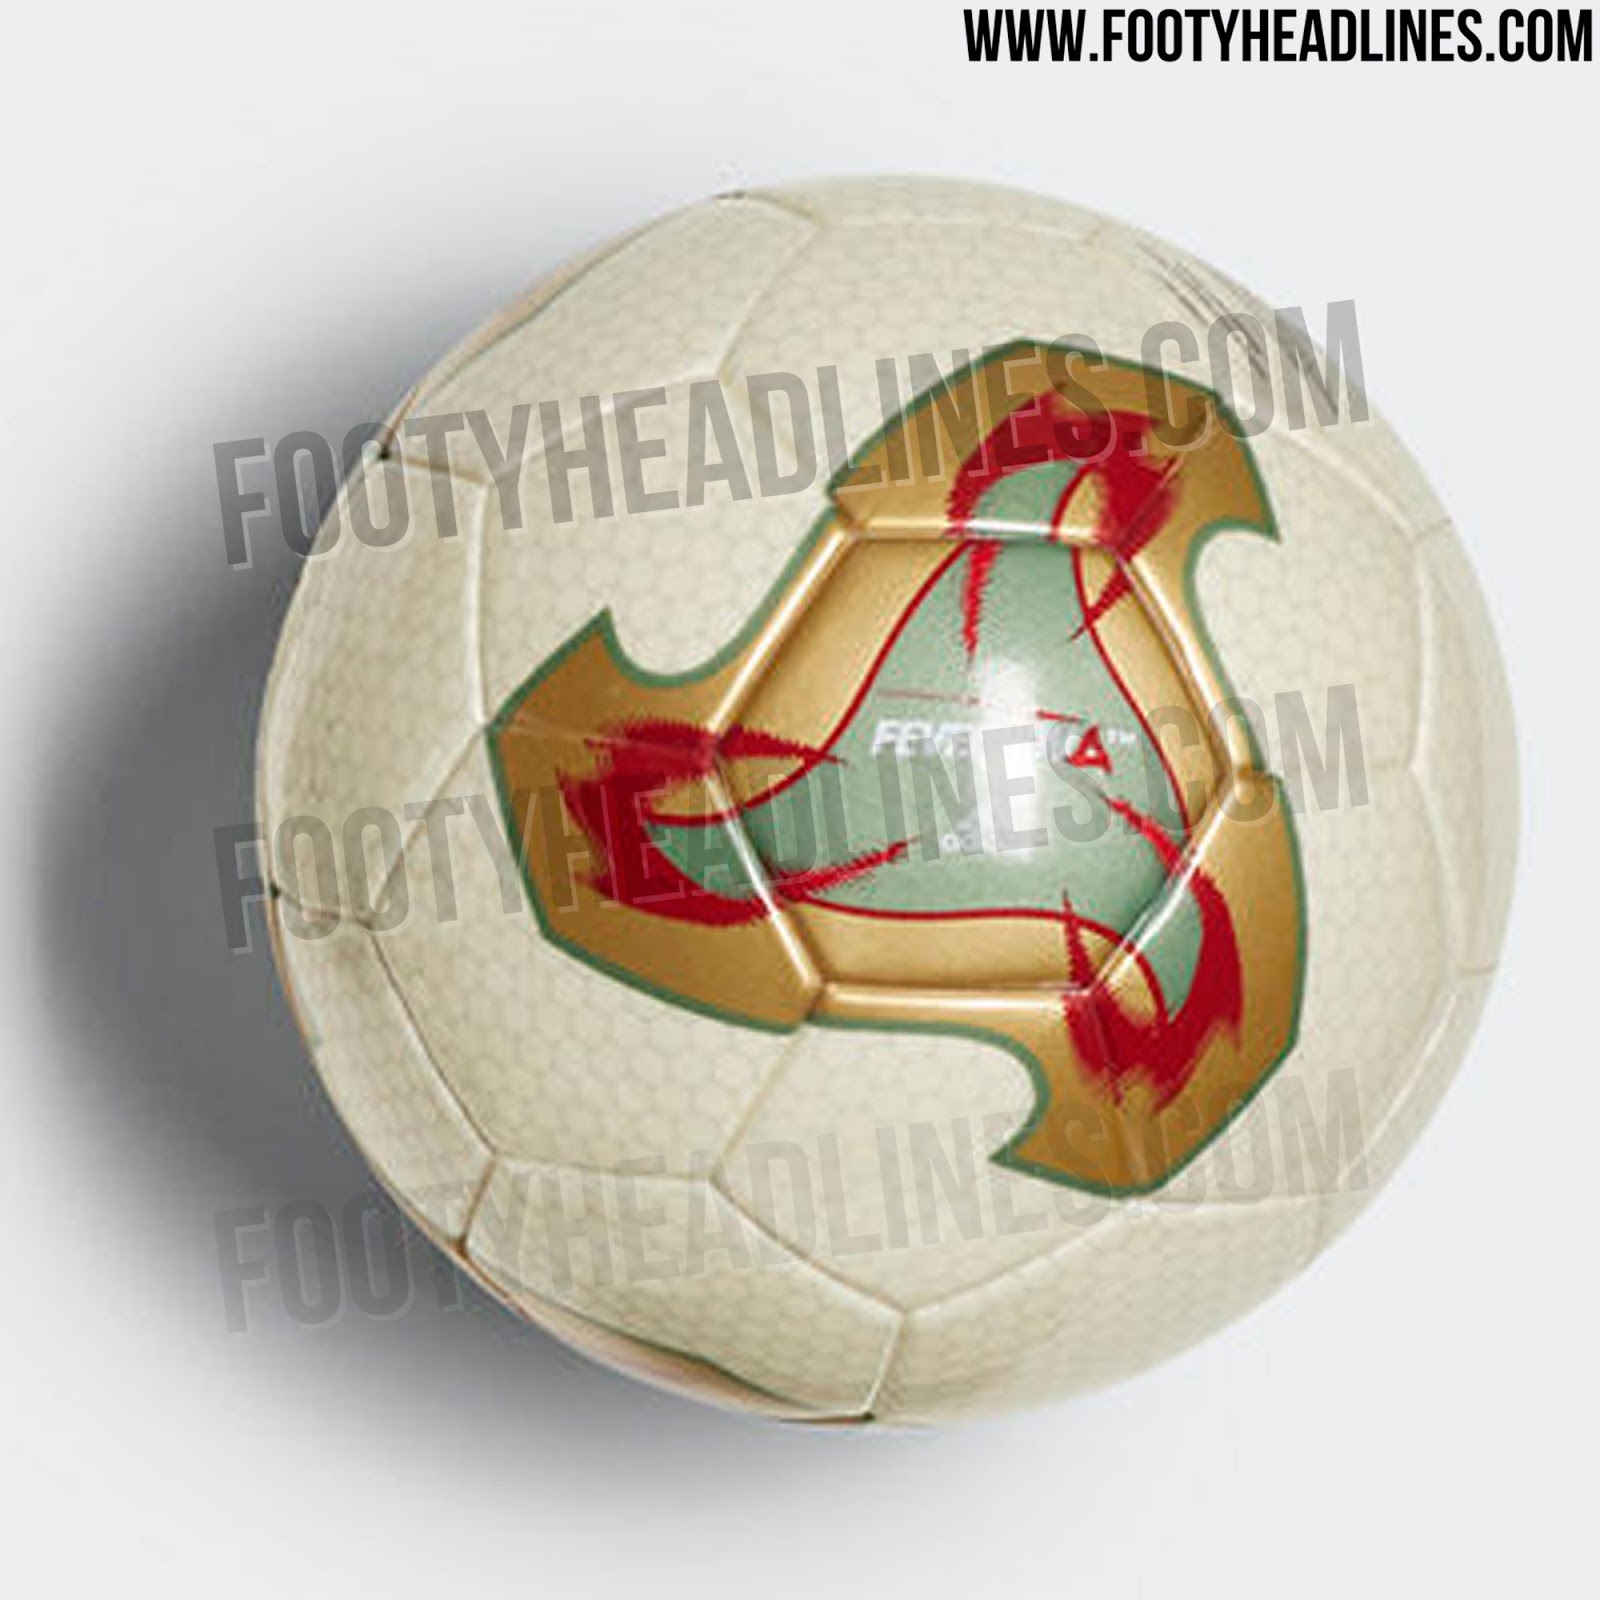 Sold Out Immediately: Adidas 1970-2022 World Cup Mini Ball Set